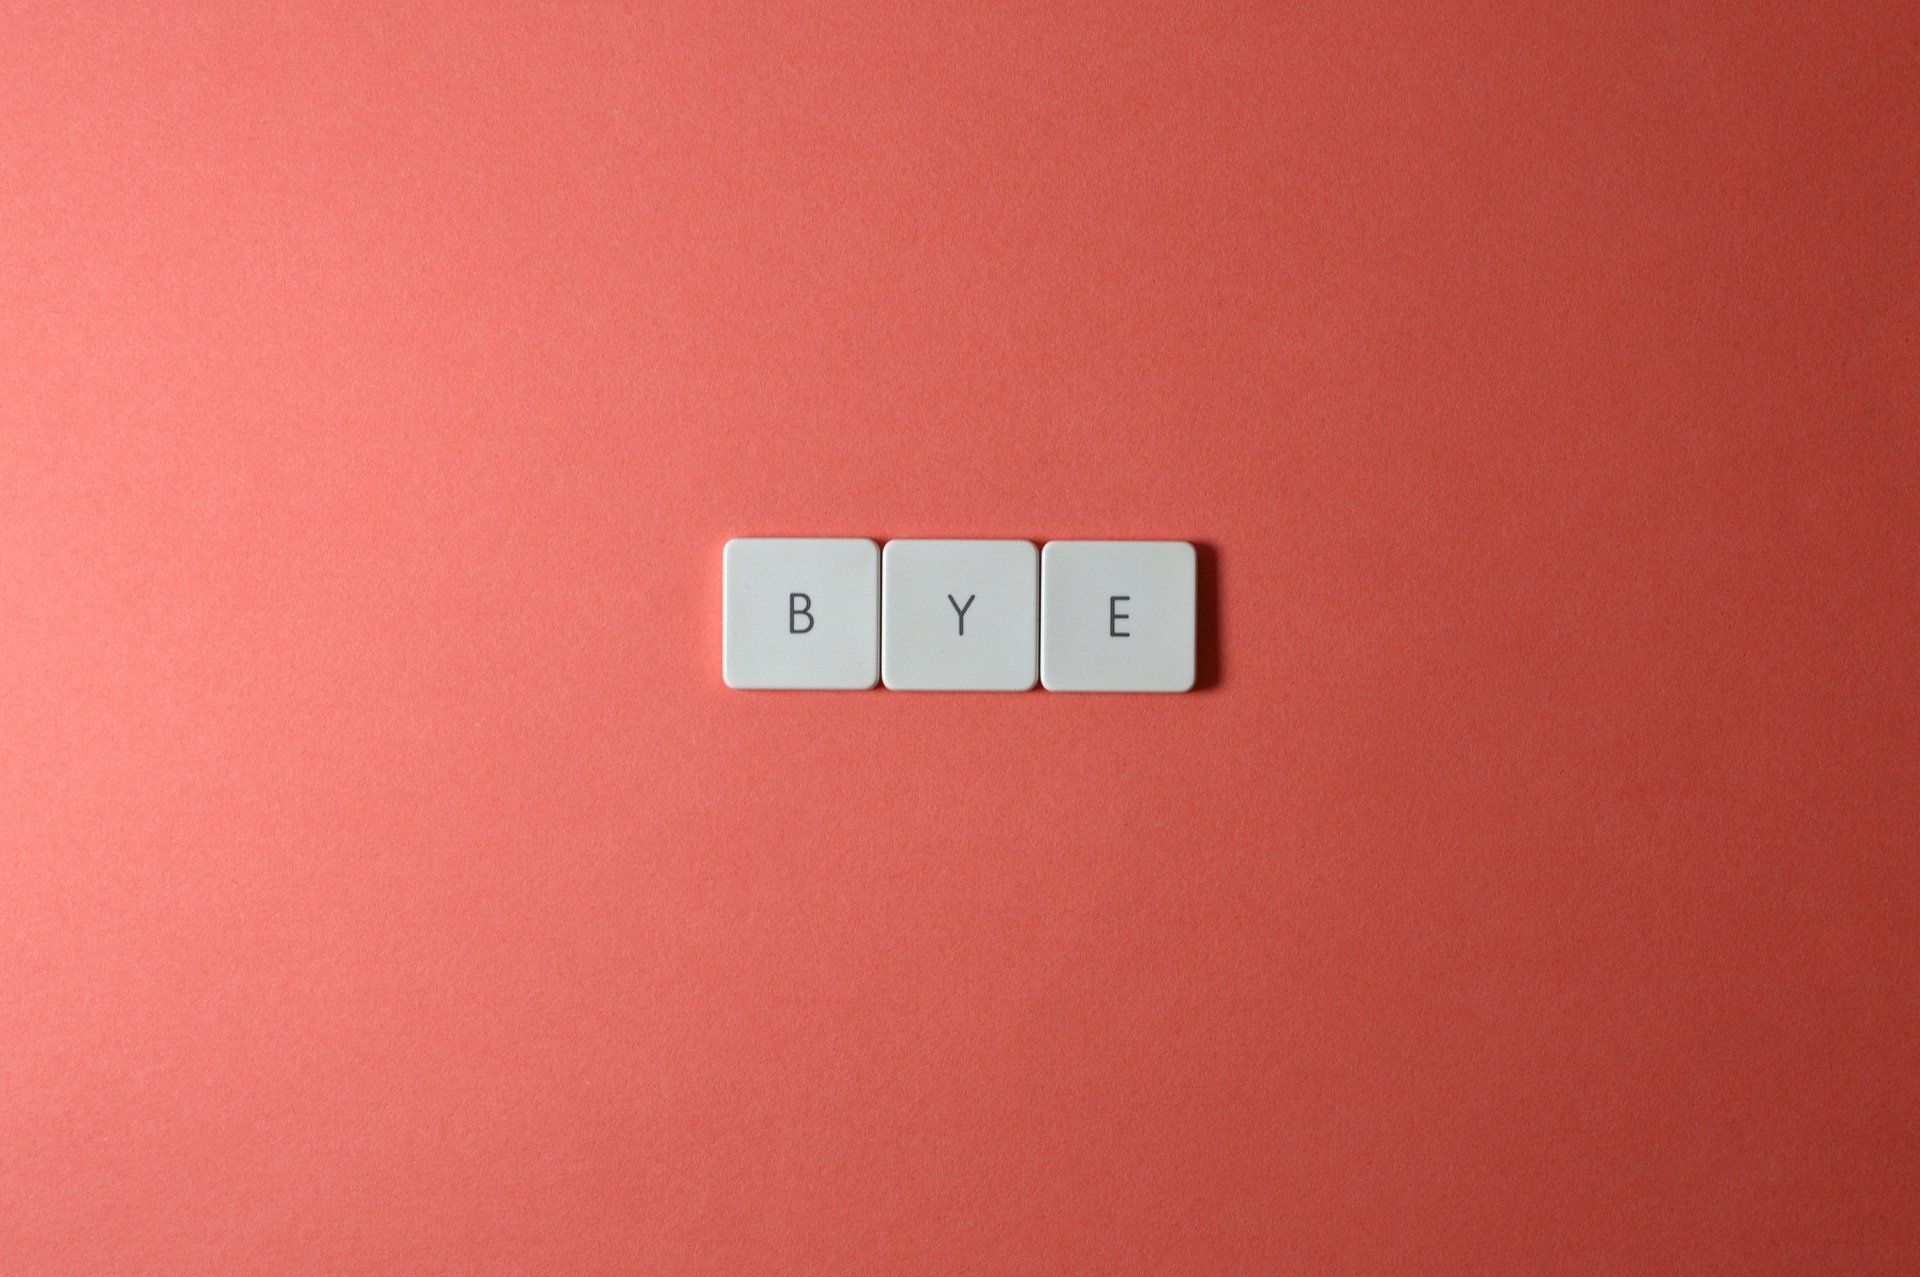 the word bye is written in white tiles on a red background .